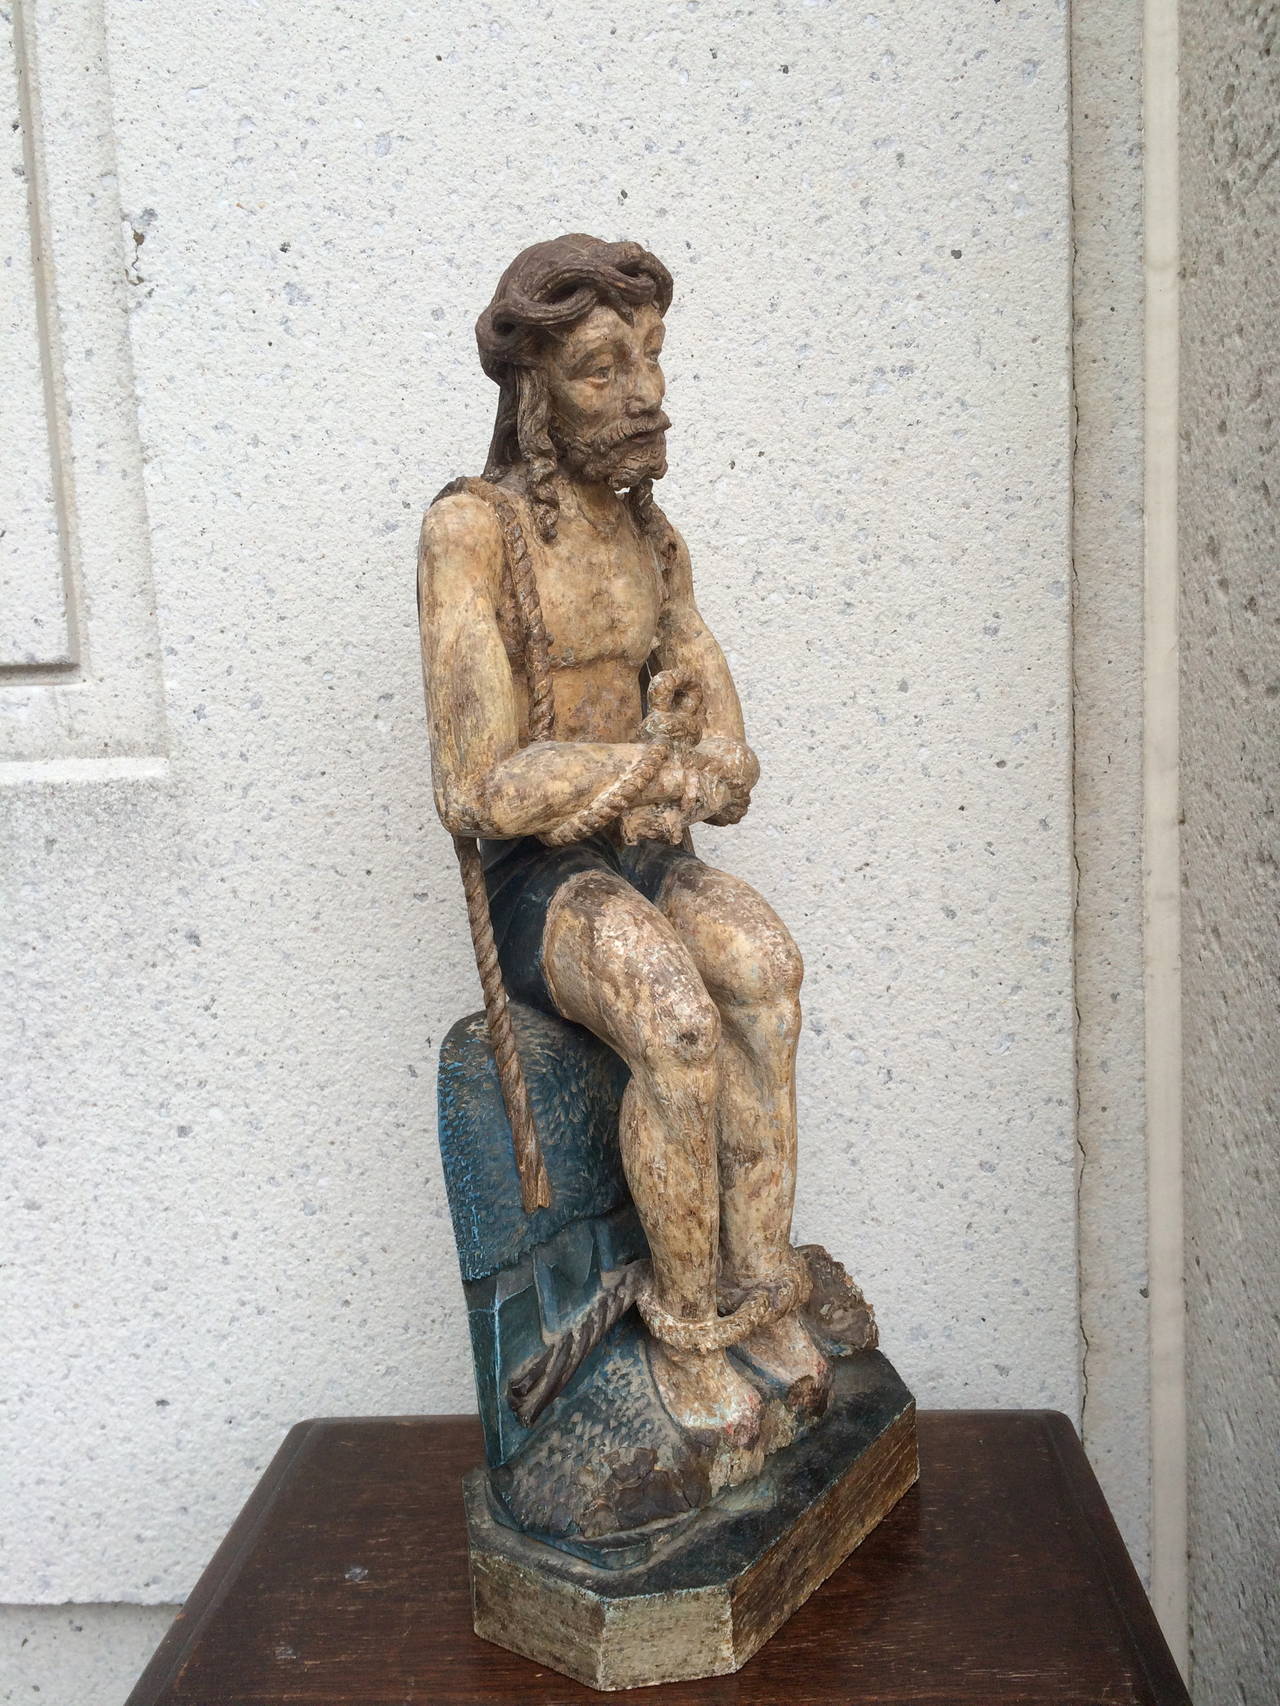 A mid 15th century Netherlandish oak carving of Christ on the cold stone with the original polychrome.  Christ is depicted here with the profoundly distraught expression that reveals the depth of his anguish as he waits to be crucified. 

To sit